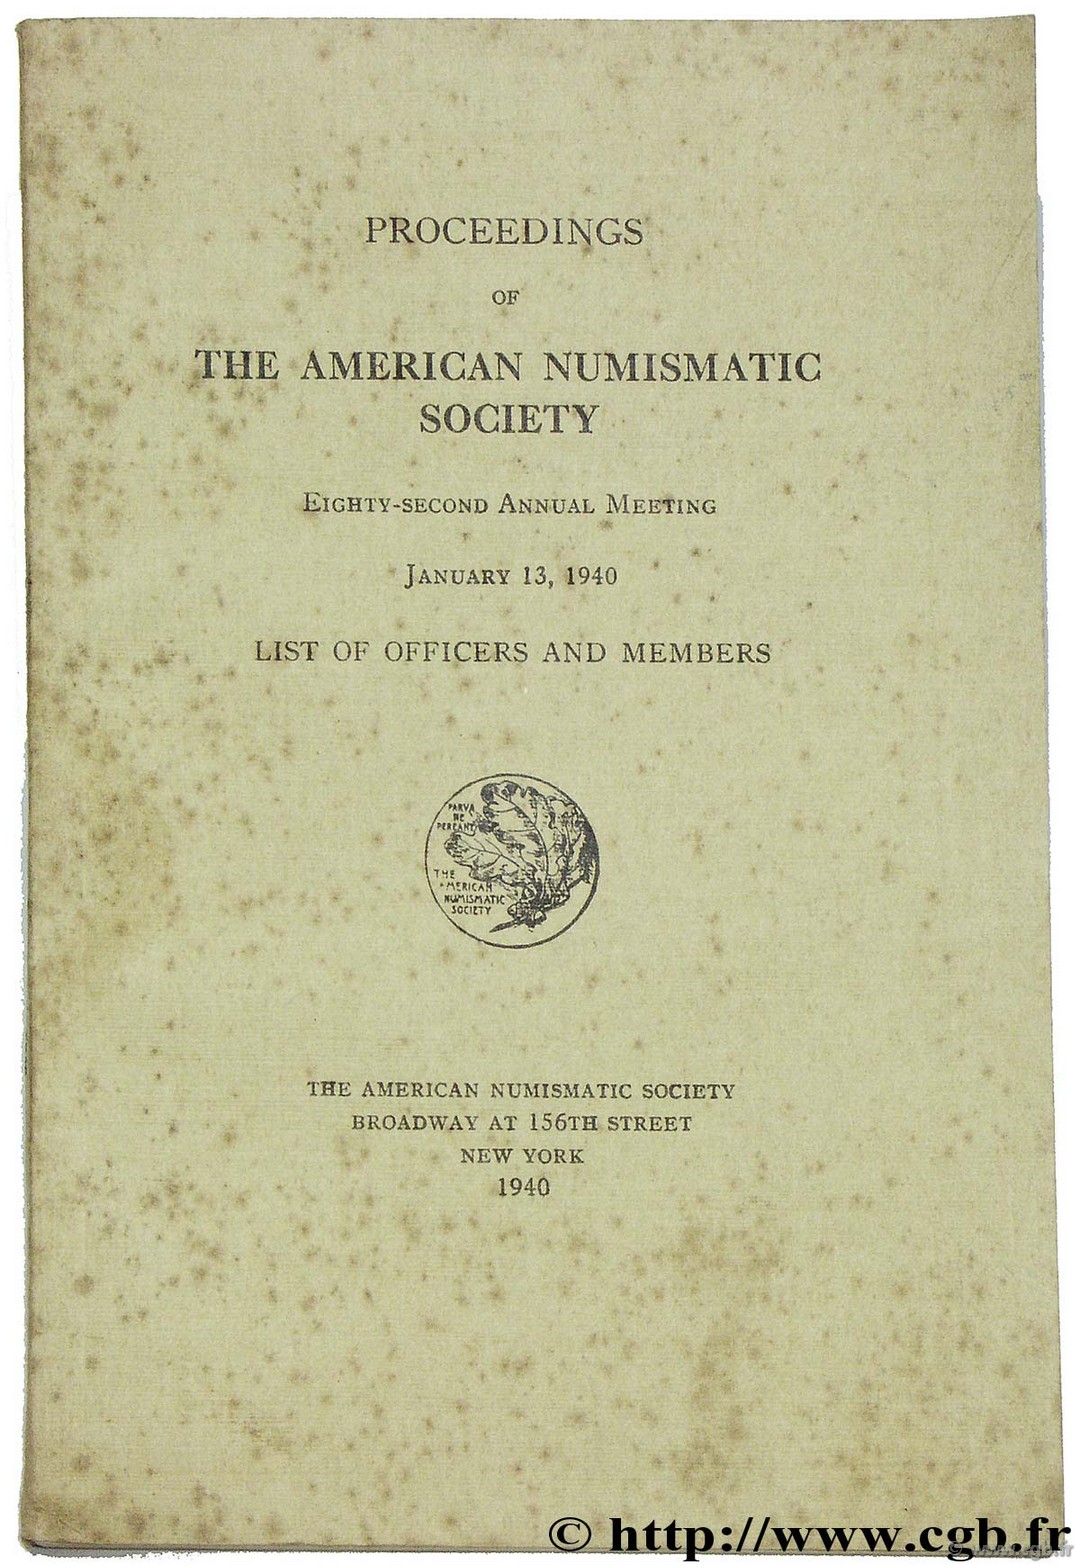 Proceendings of the american numismatic society eighty-second annual meeting 